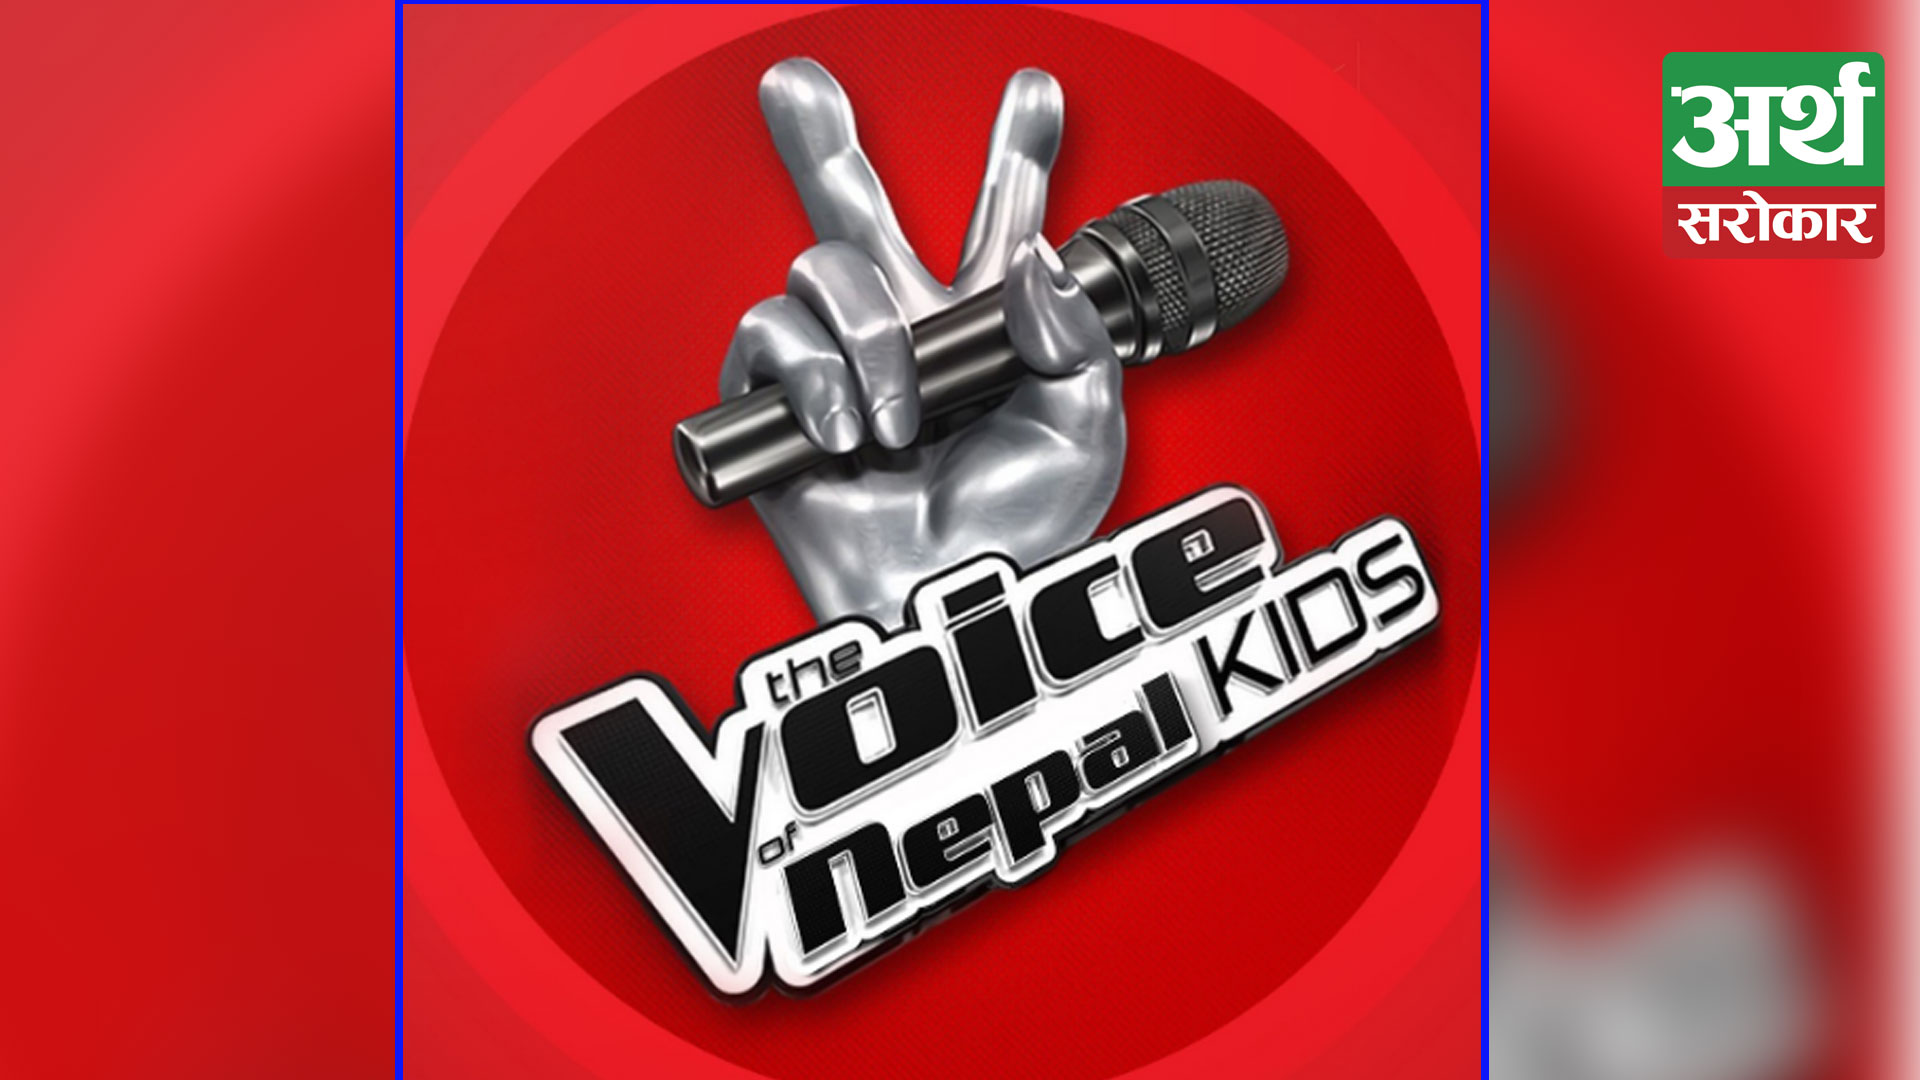 Lifebuoy announces its association as the Hygiene Partner for The Voice Kids Nepal